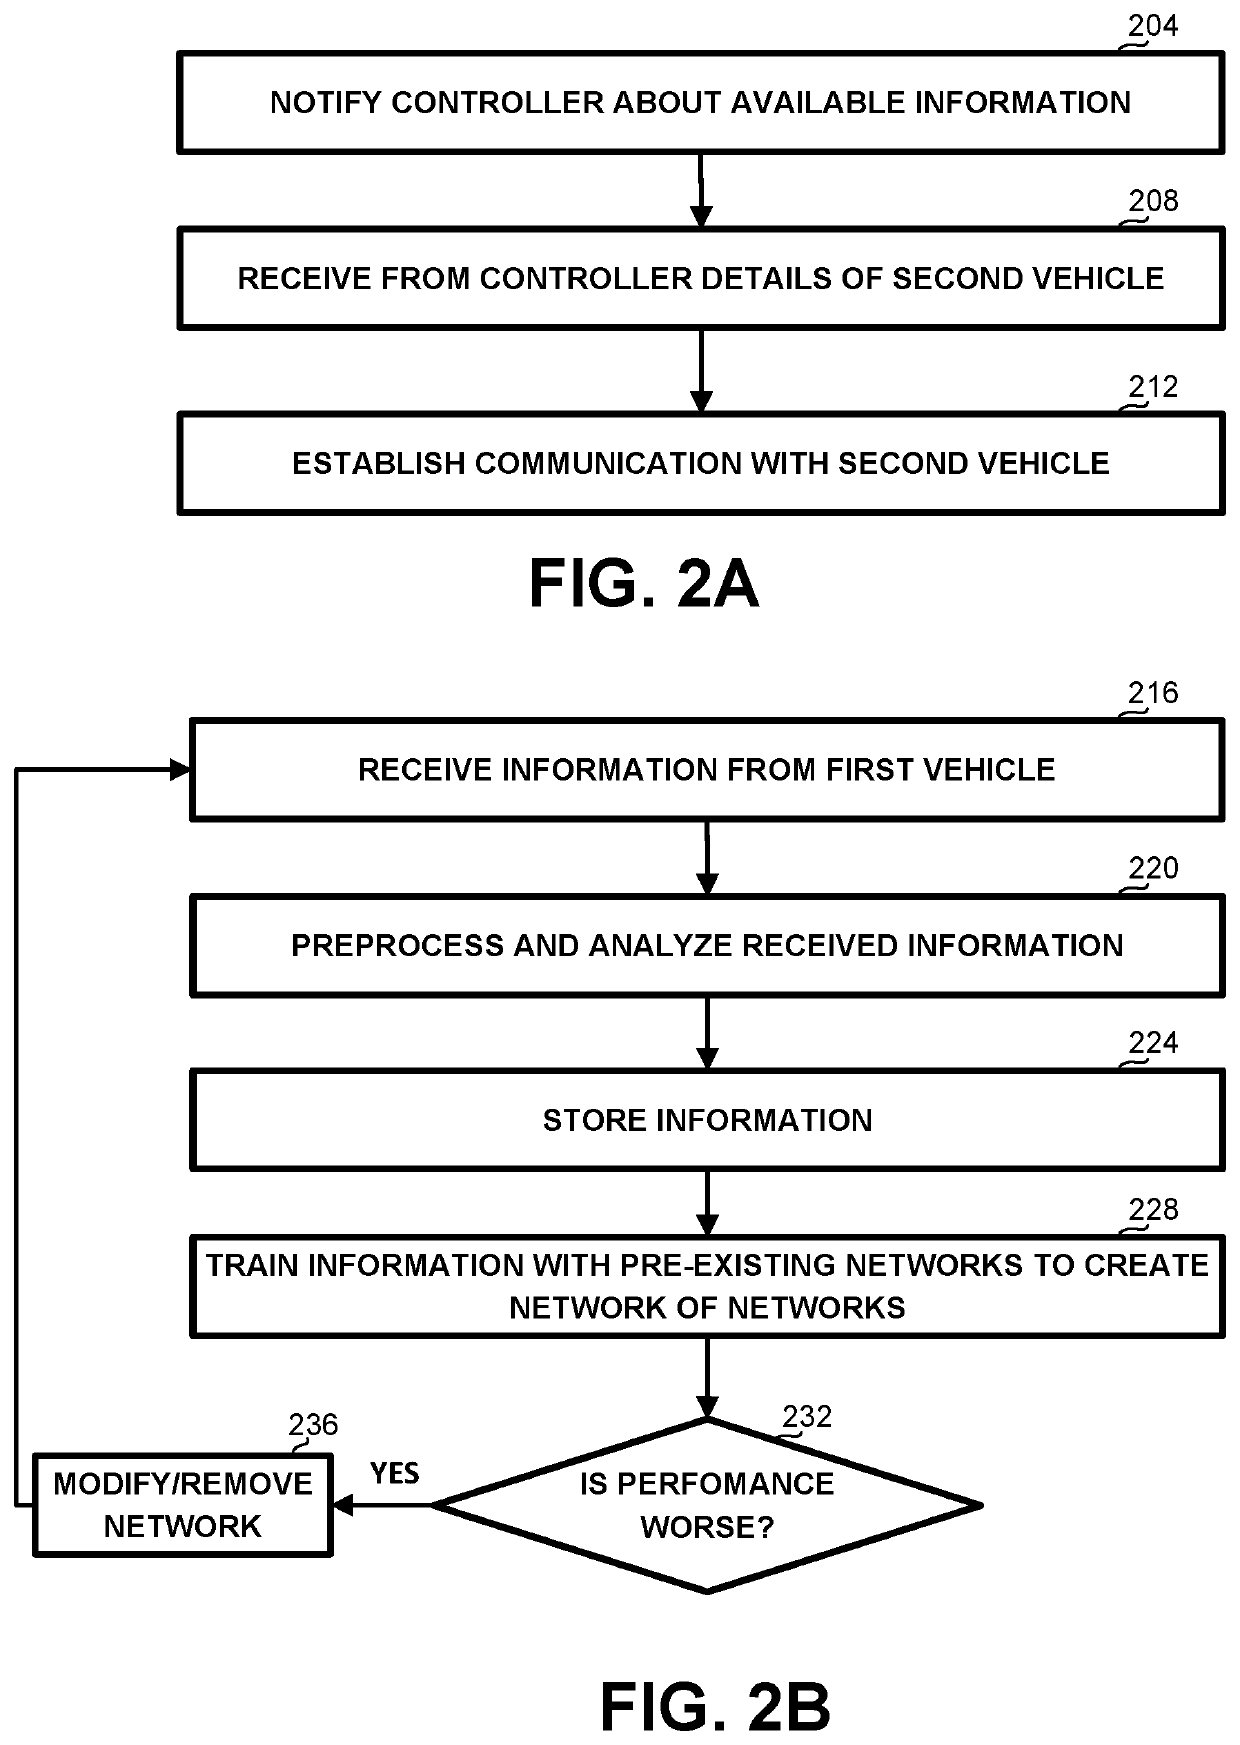 A System and Method for Using Knowledge Gathered by a Vehicle